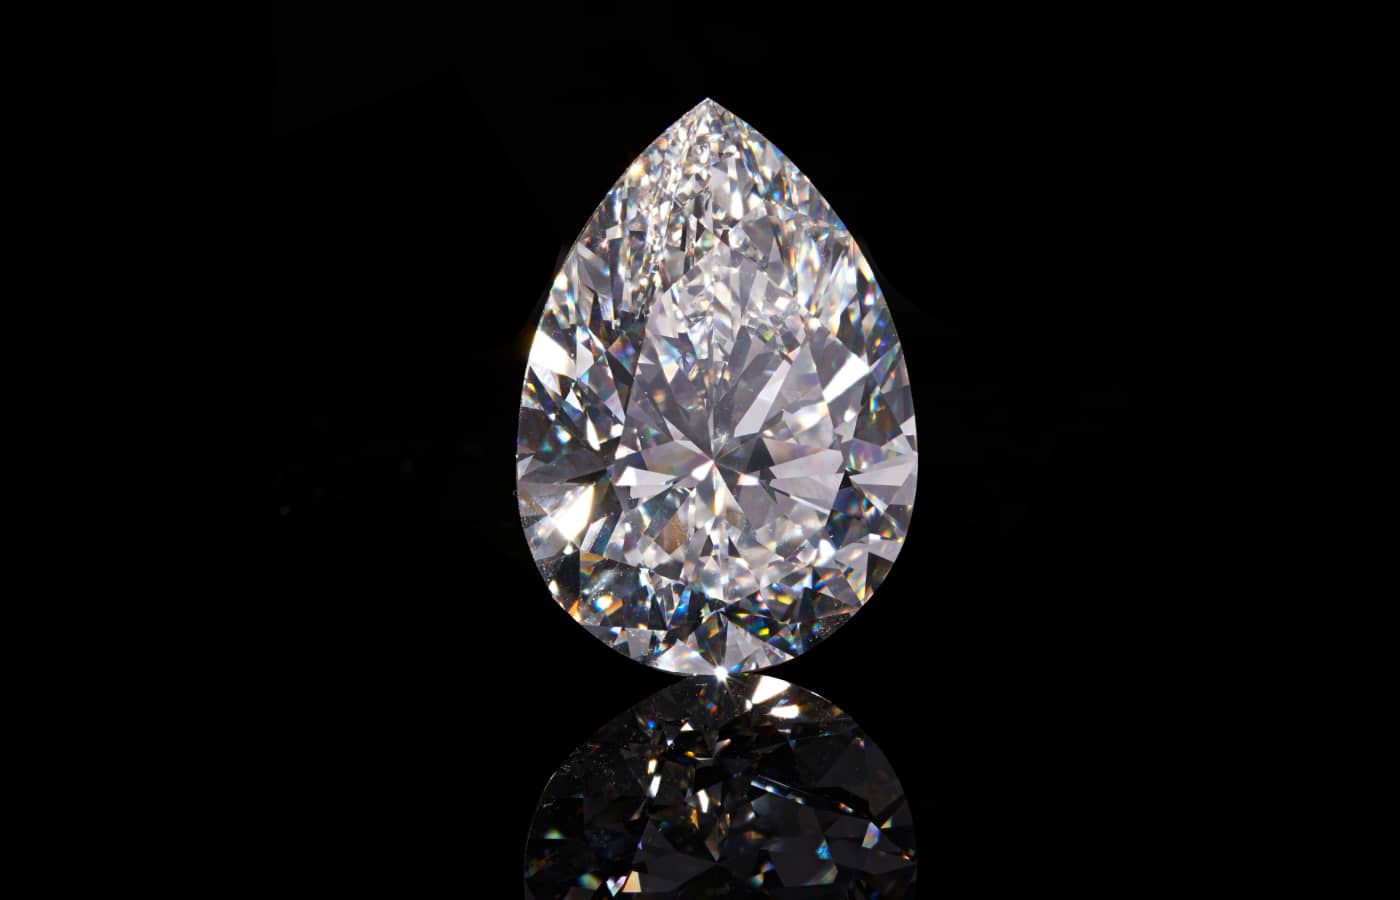 Christie's The Rock diamond, weighing 228.31.cts, is the largest white diamond ever to be sold at auction 